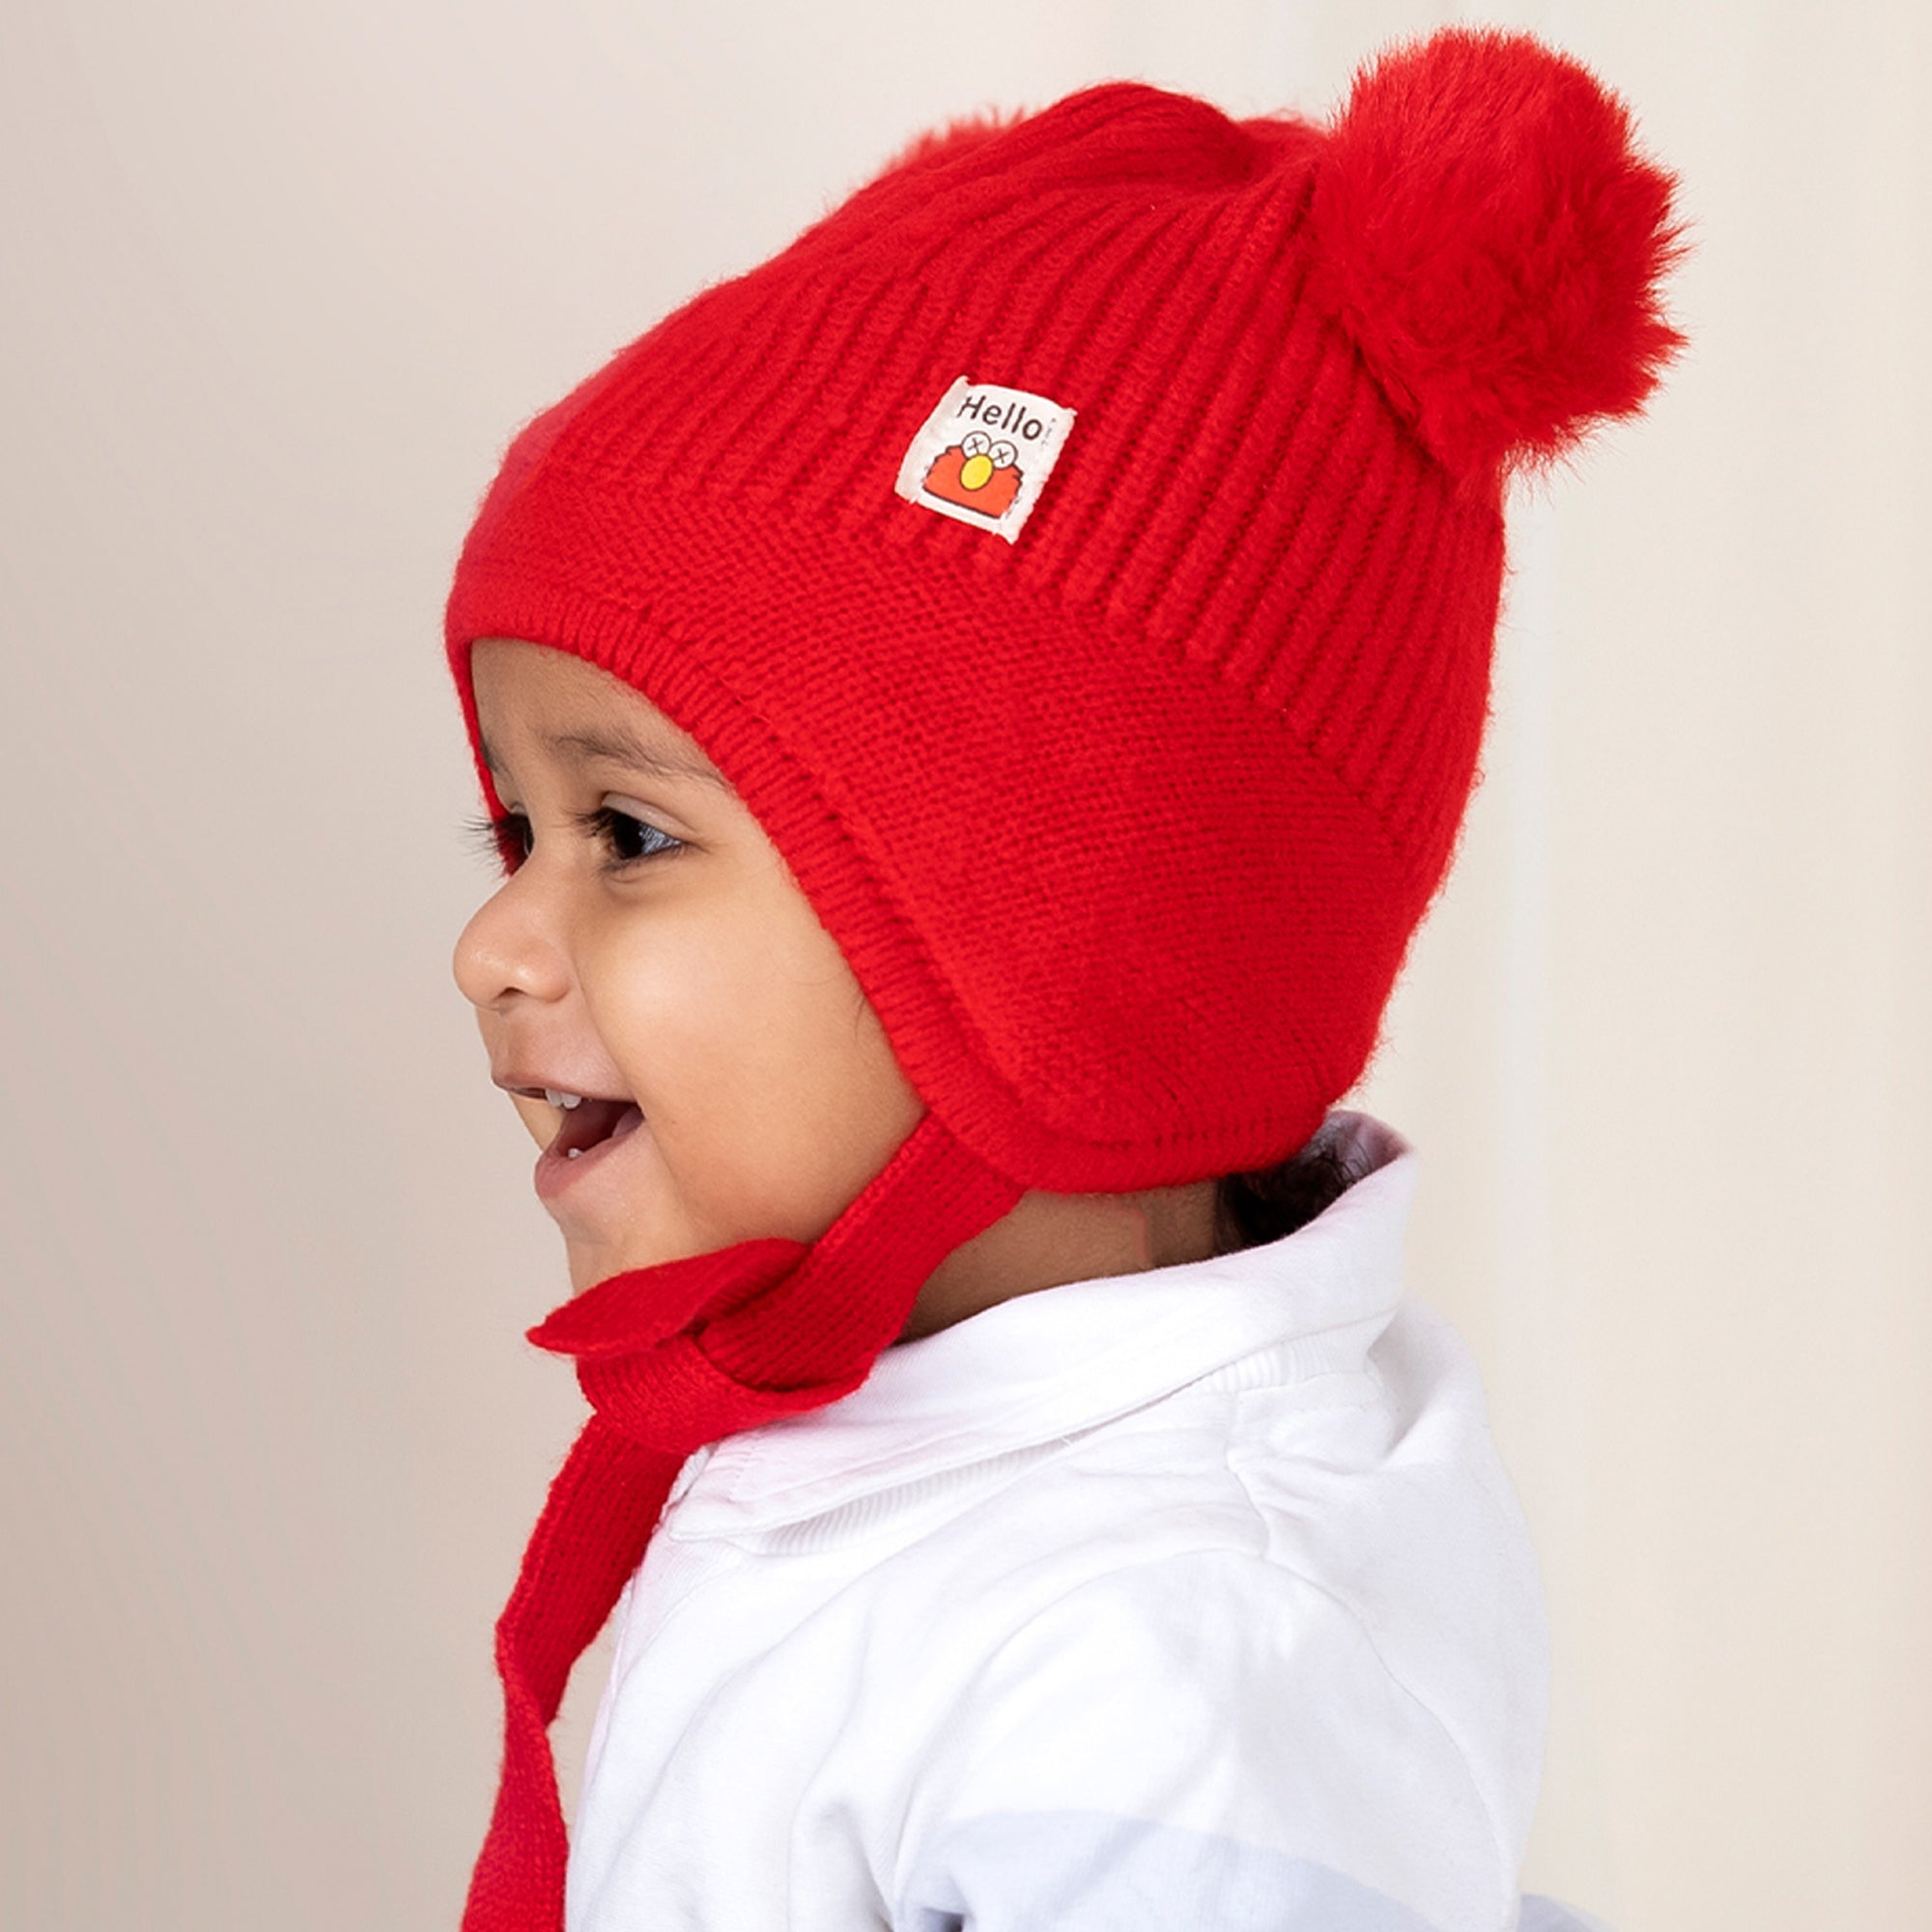 Baby Moo Solid Infant To Toddler Winter Beanie Woollen Cap - Red